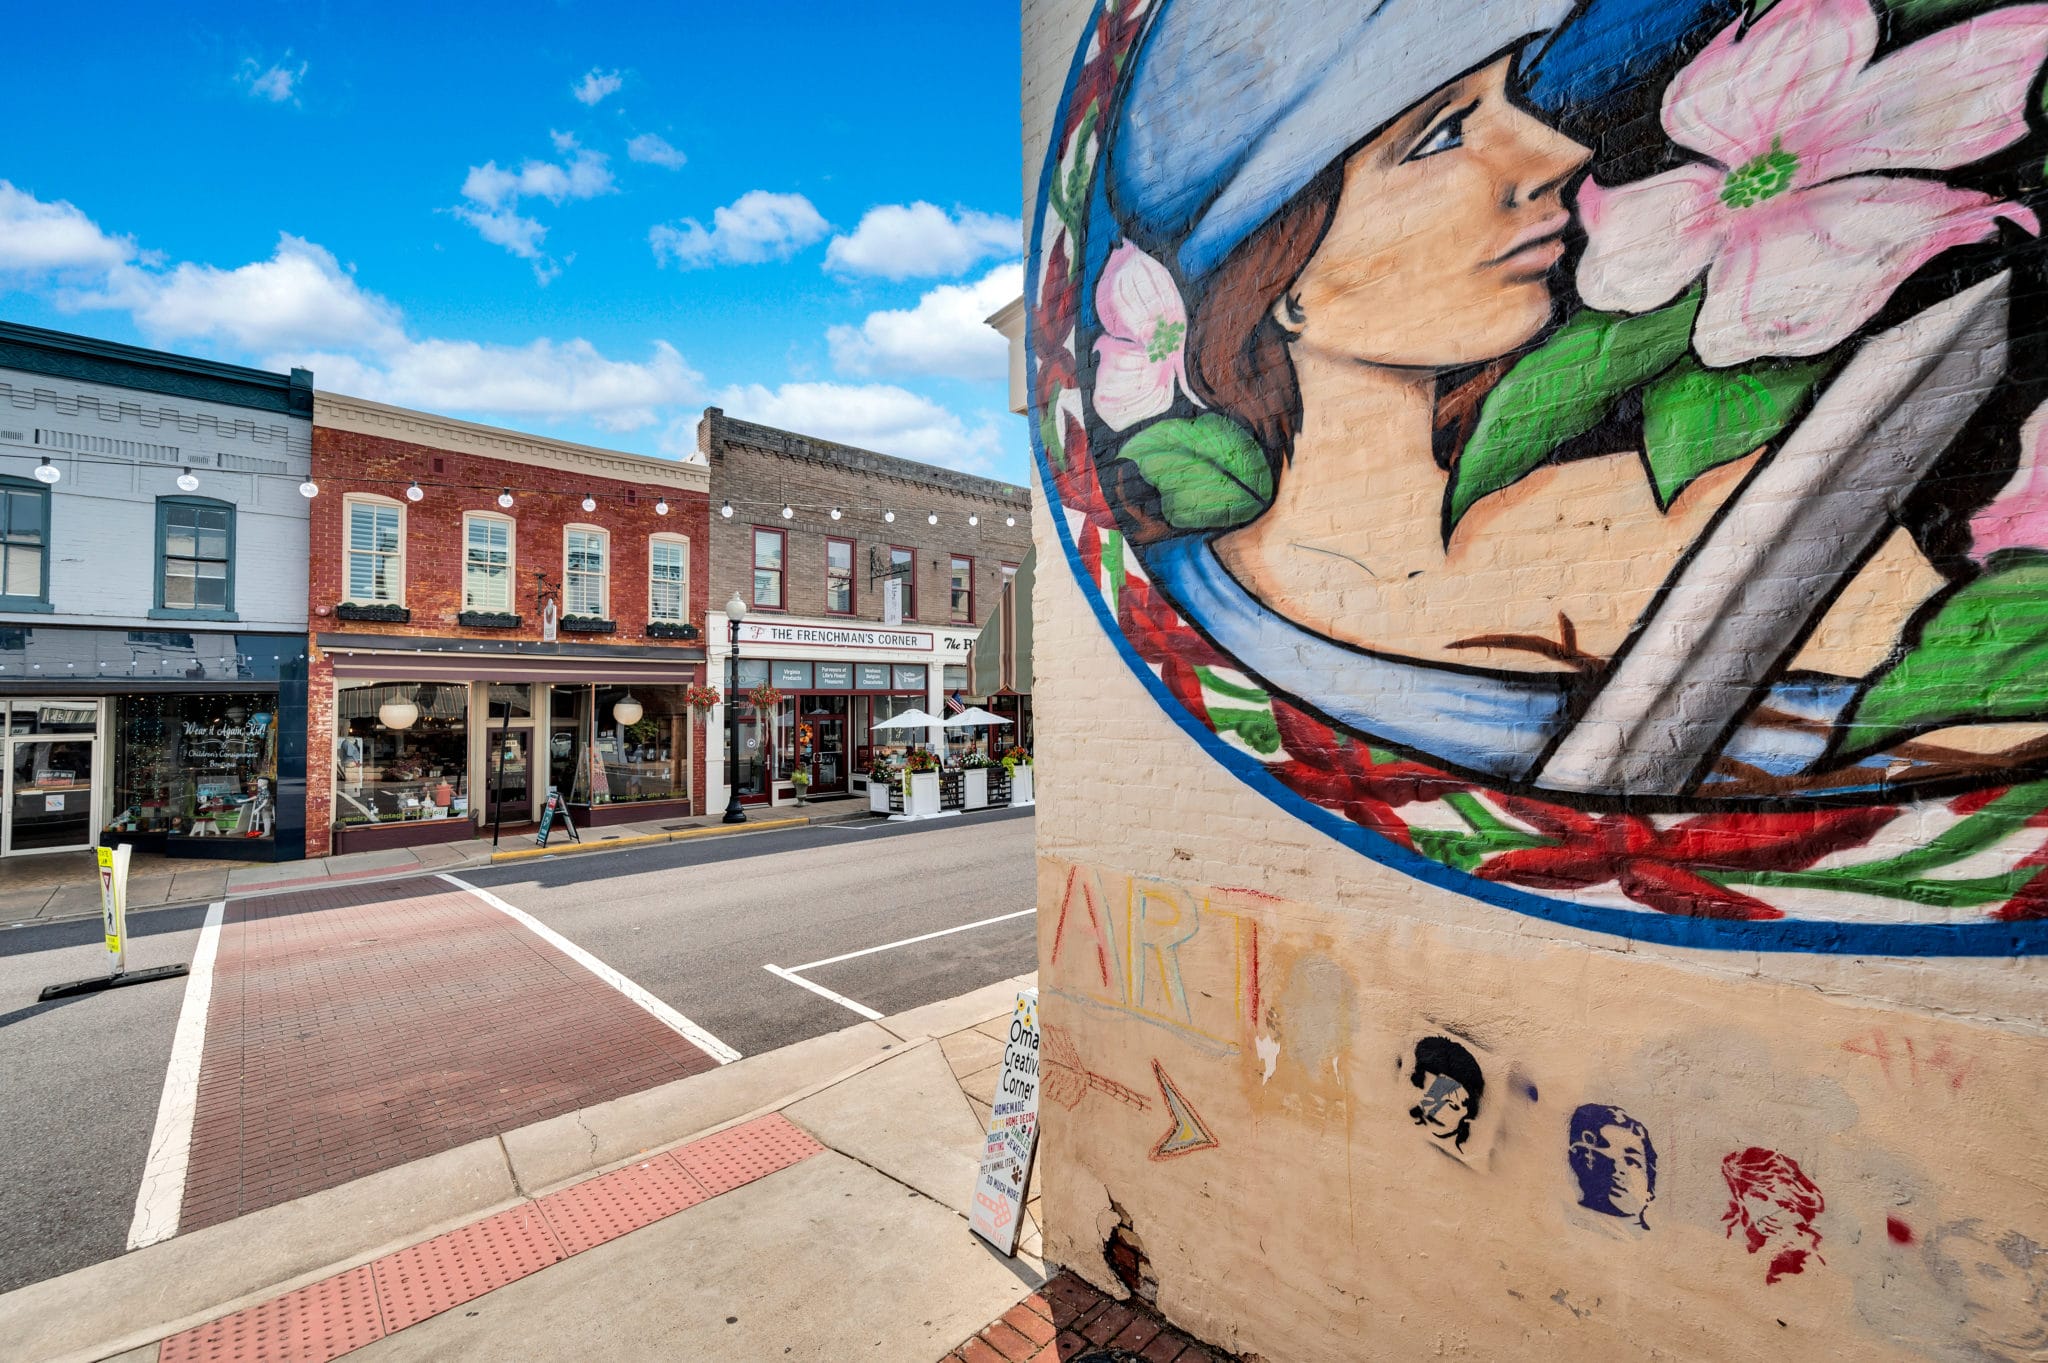 downtown shops and mural | Spark Culpeper apartments